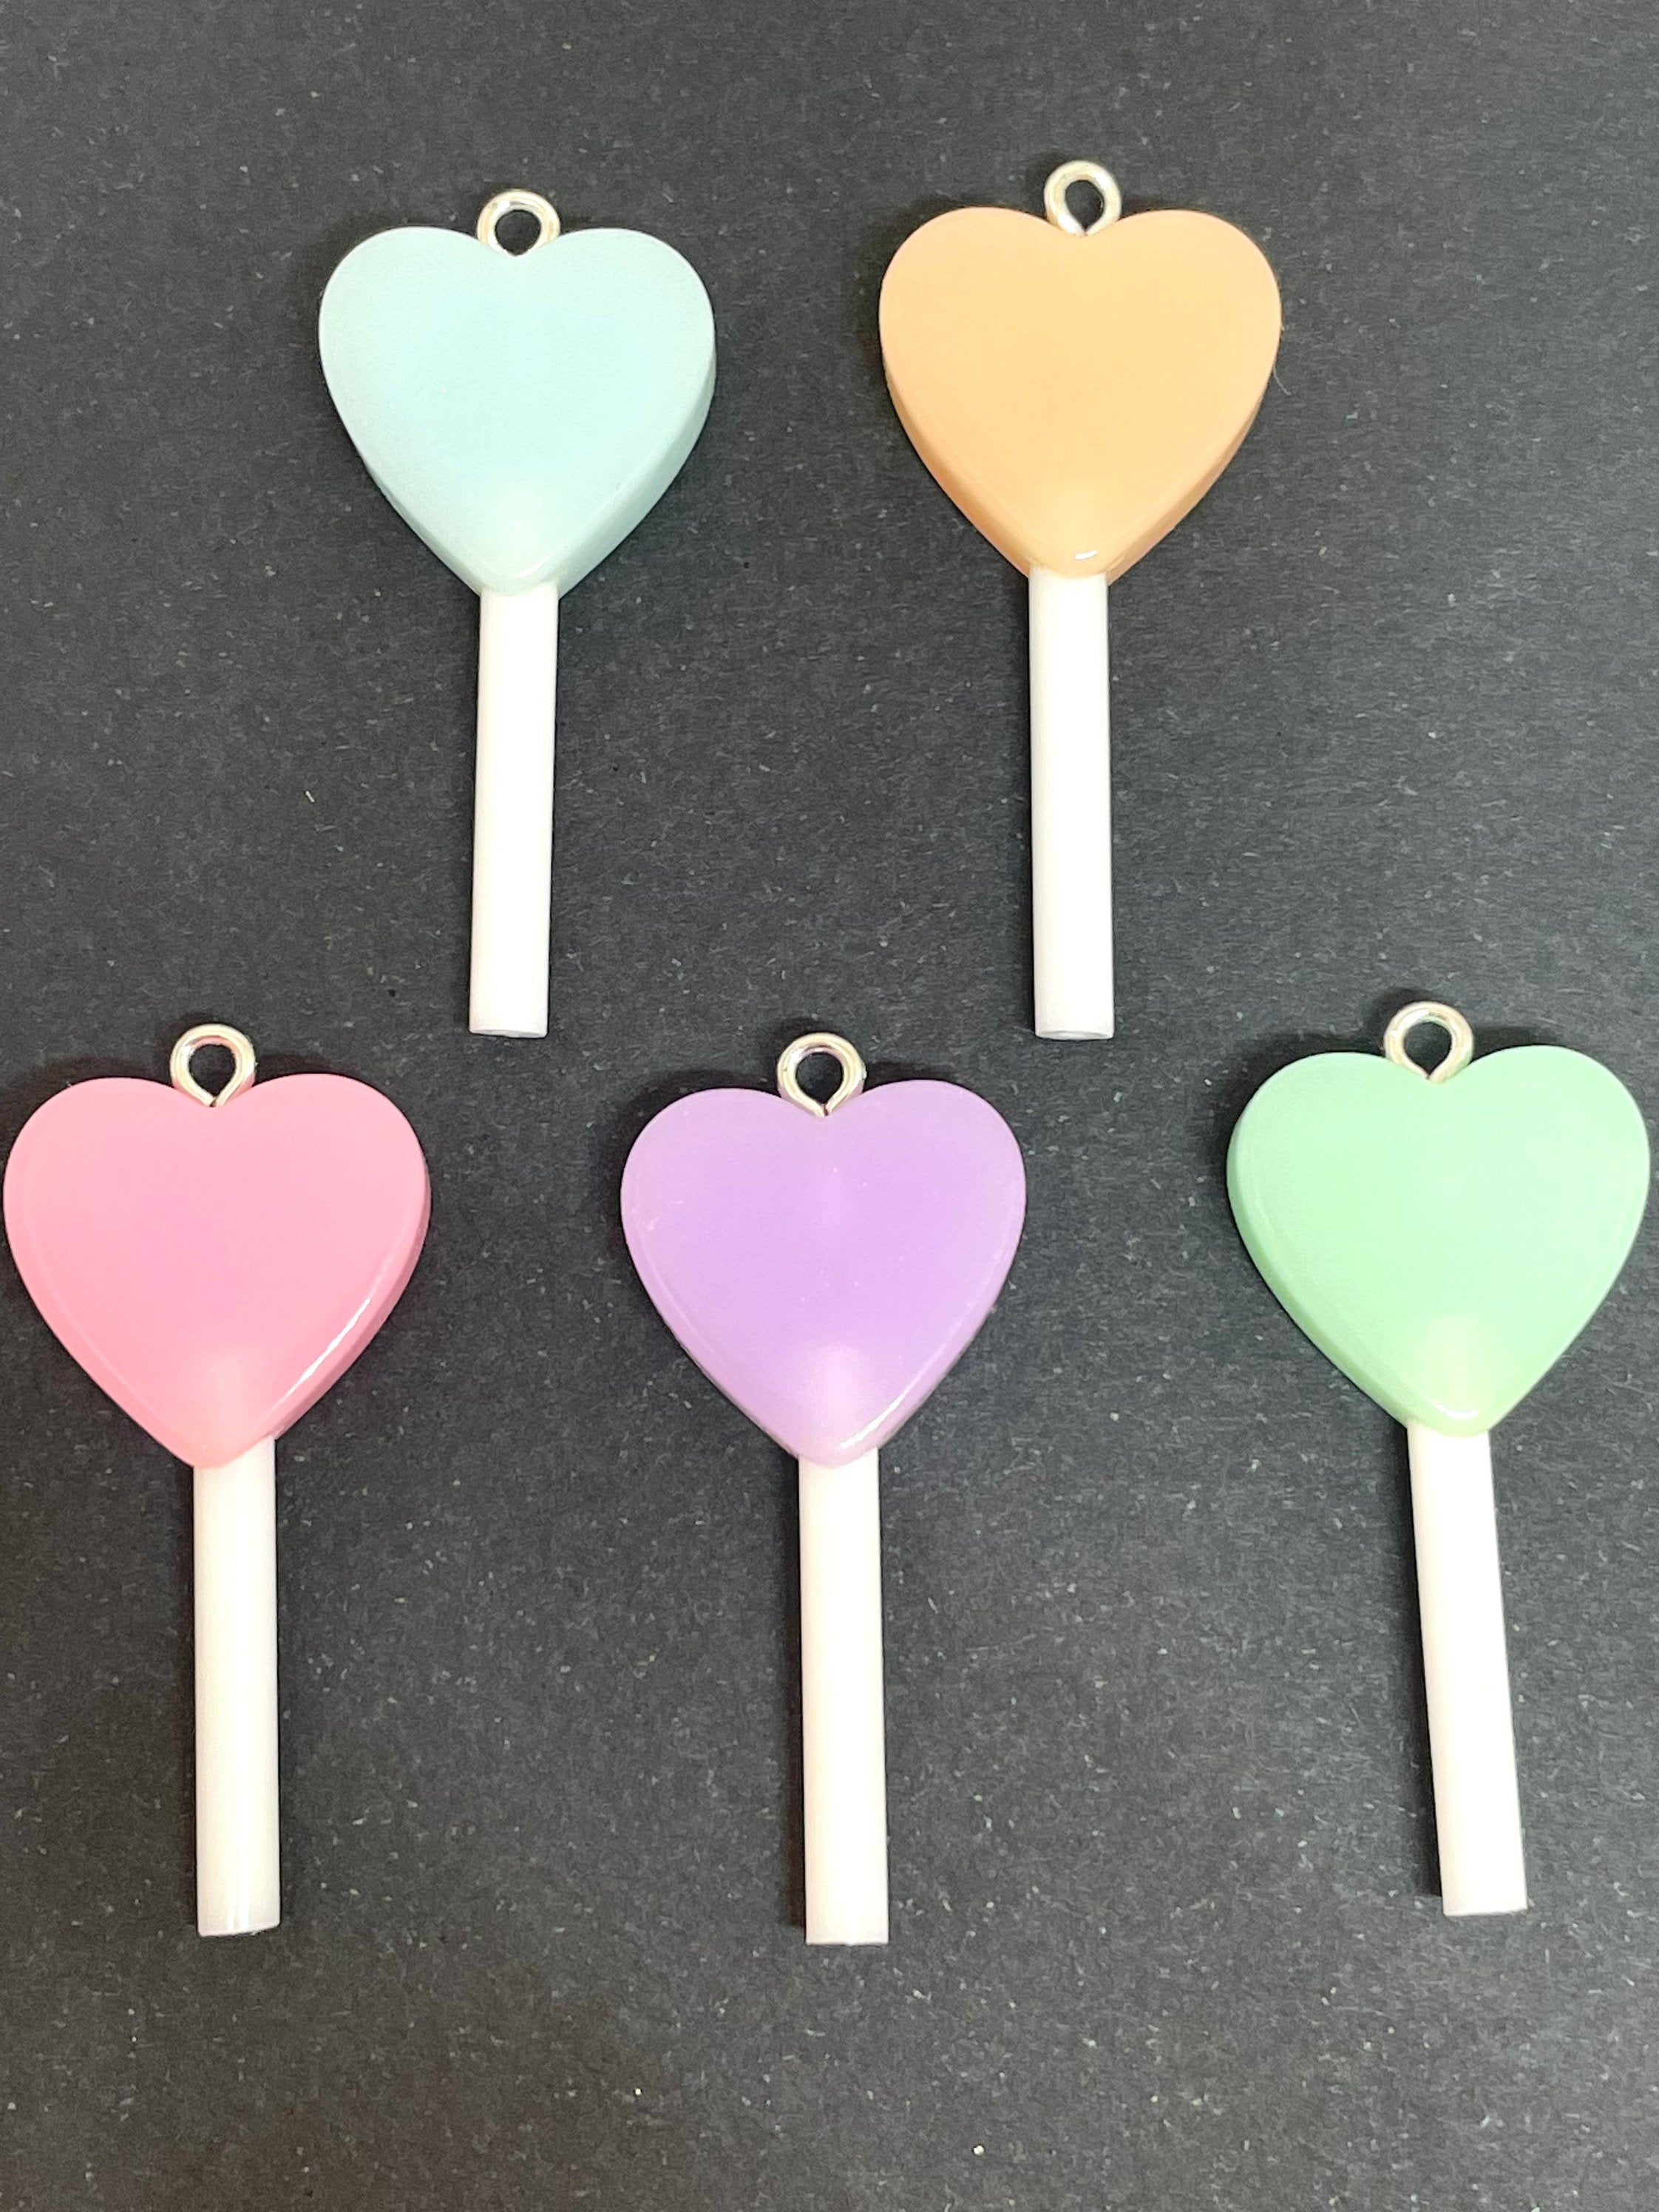 Pastel Heart Lollipop Charm for Jewelry Making, Lollipop Pendant, Fake Candy for Valentine's Day, Heart Jewelry, Candy Jewelry